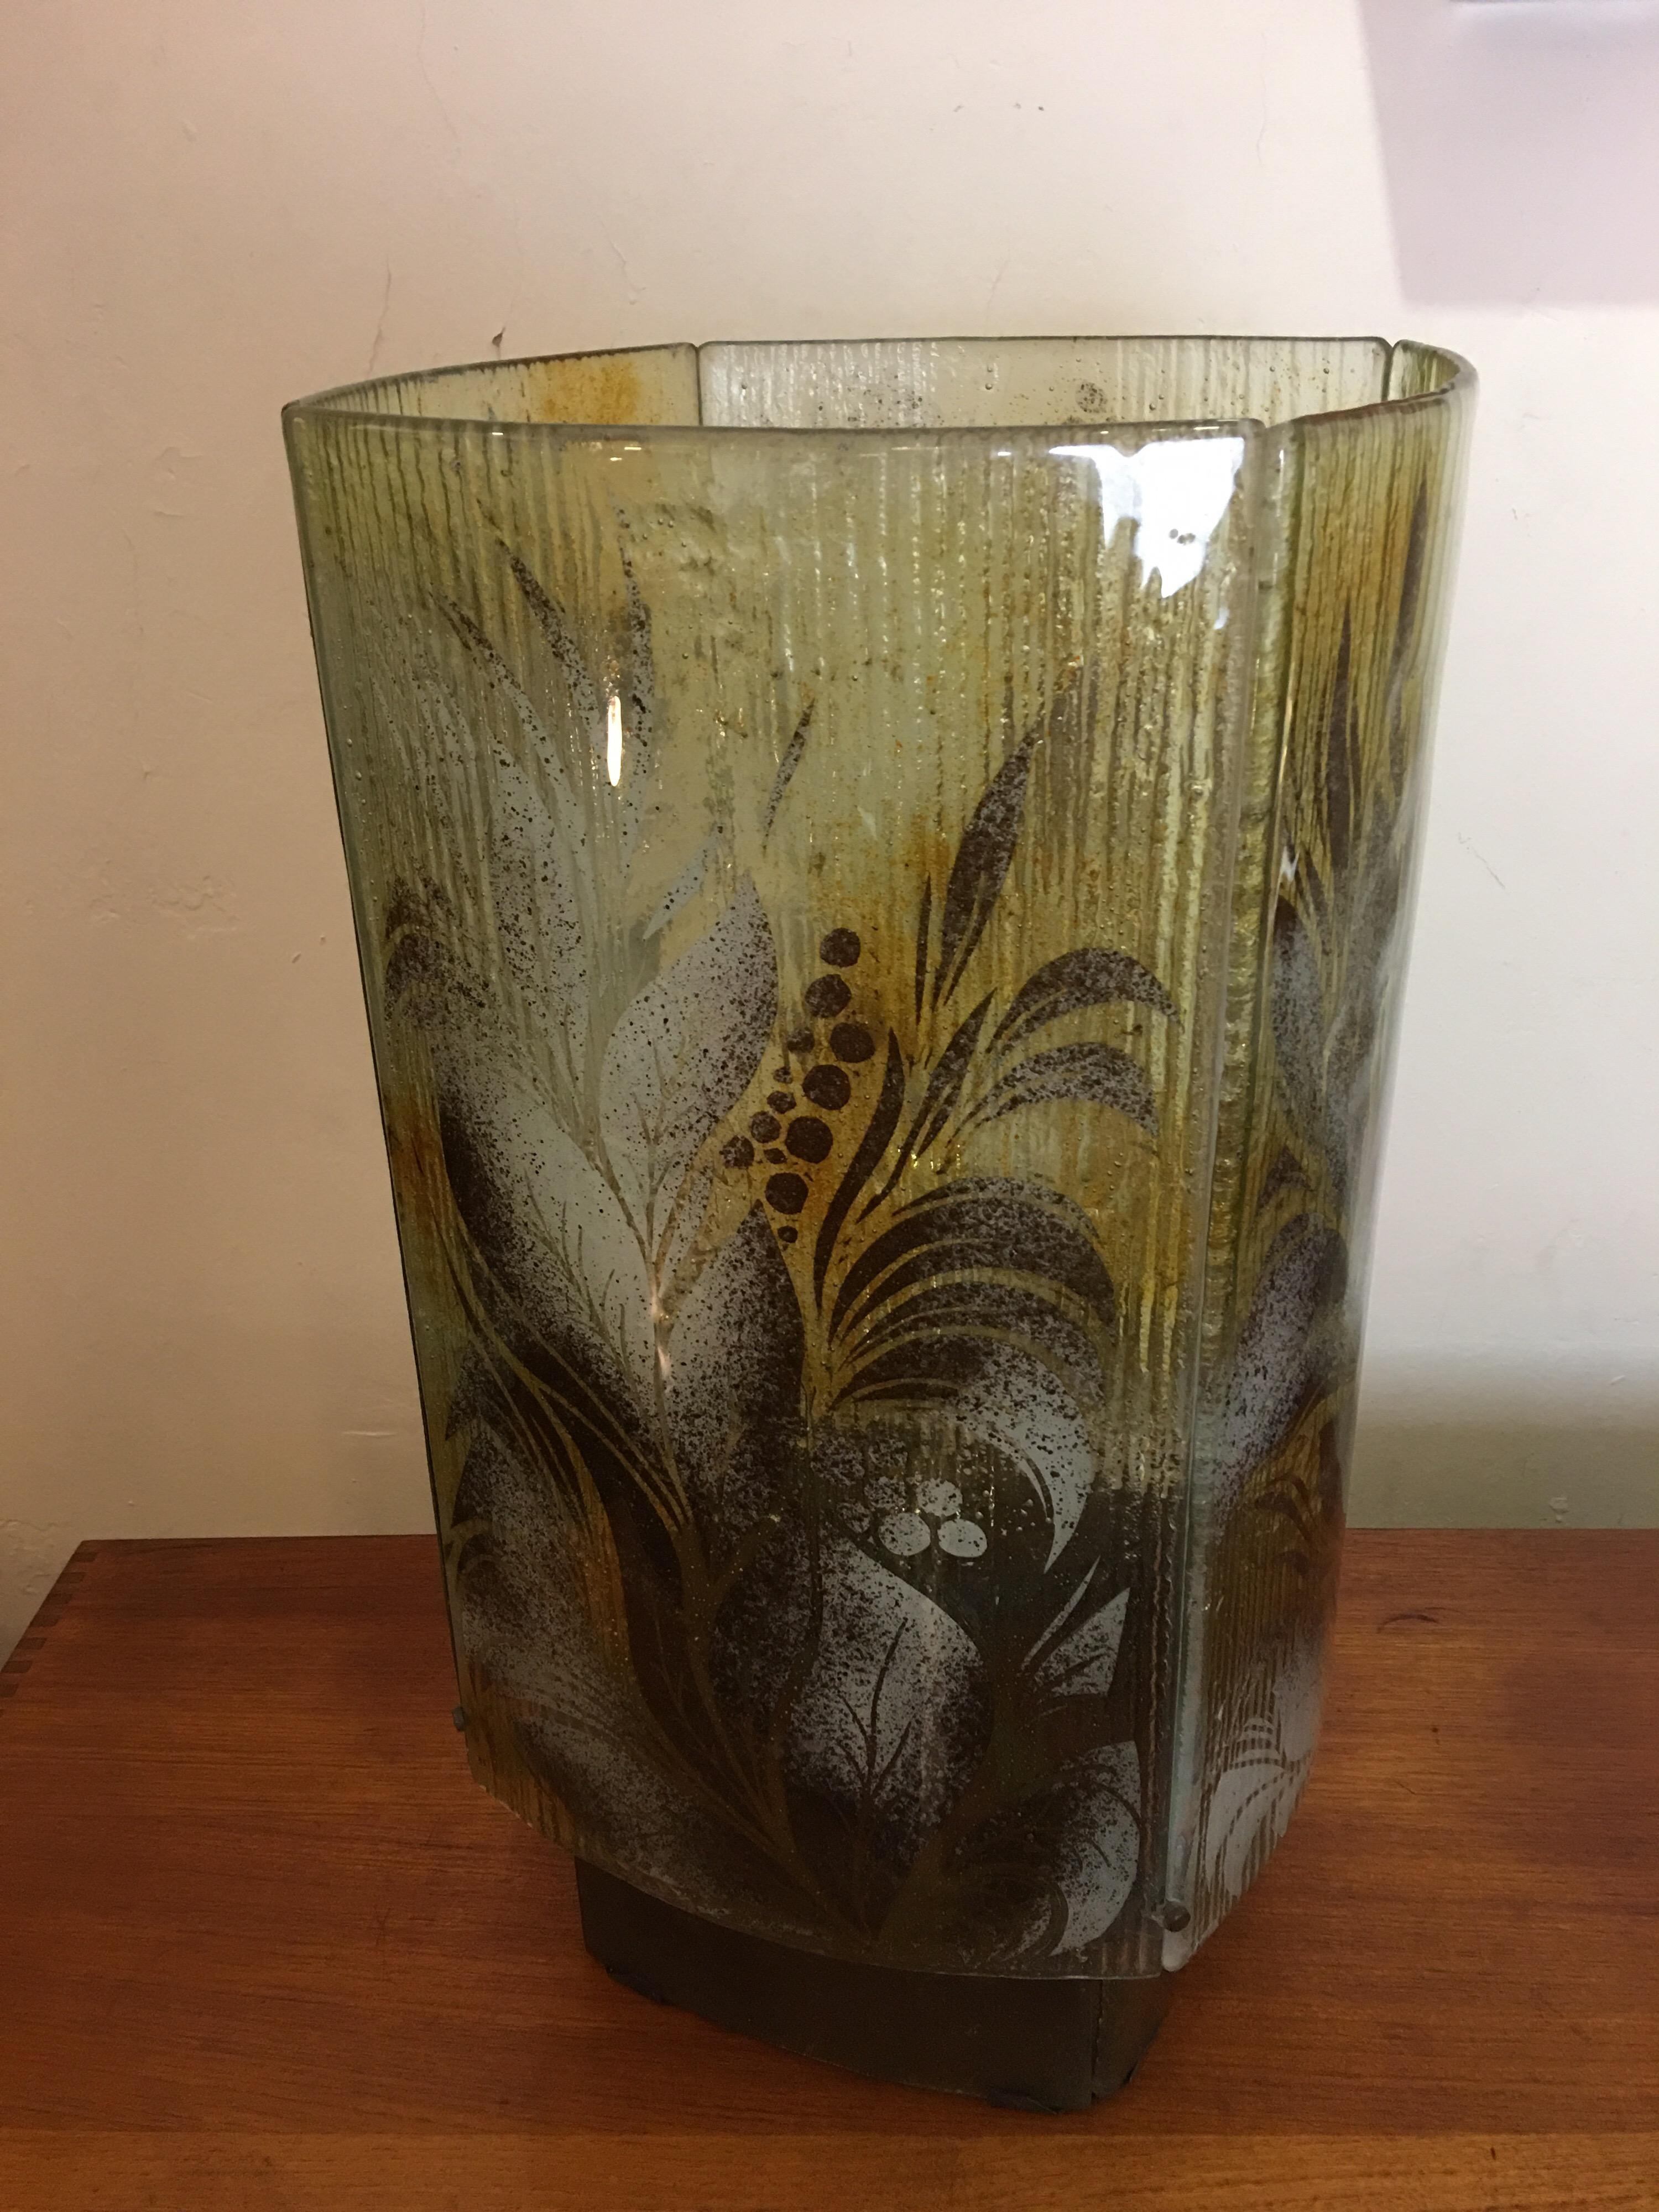 Fused or slumped glass table lamp. Made up of 4 slightly curved pieces of glass. Each panel has a leafy design motif. Base is also 4 pieces of glass. Technique is similar to Frances and Michael Higgins, American glass workers who specialized in